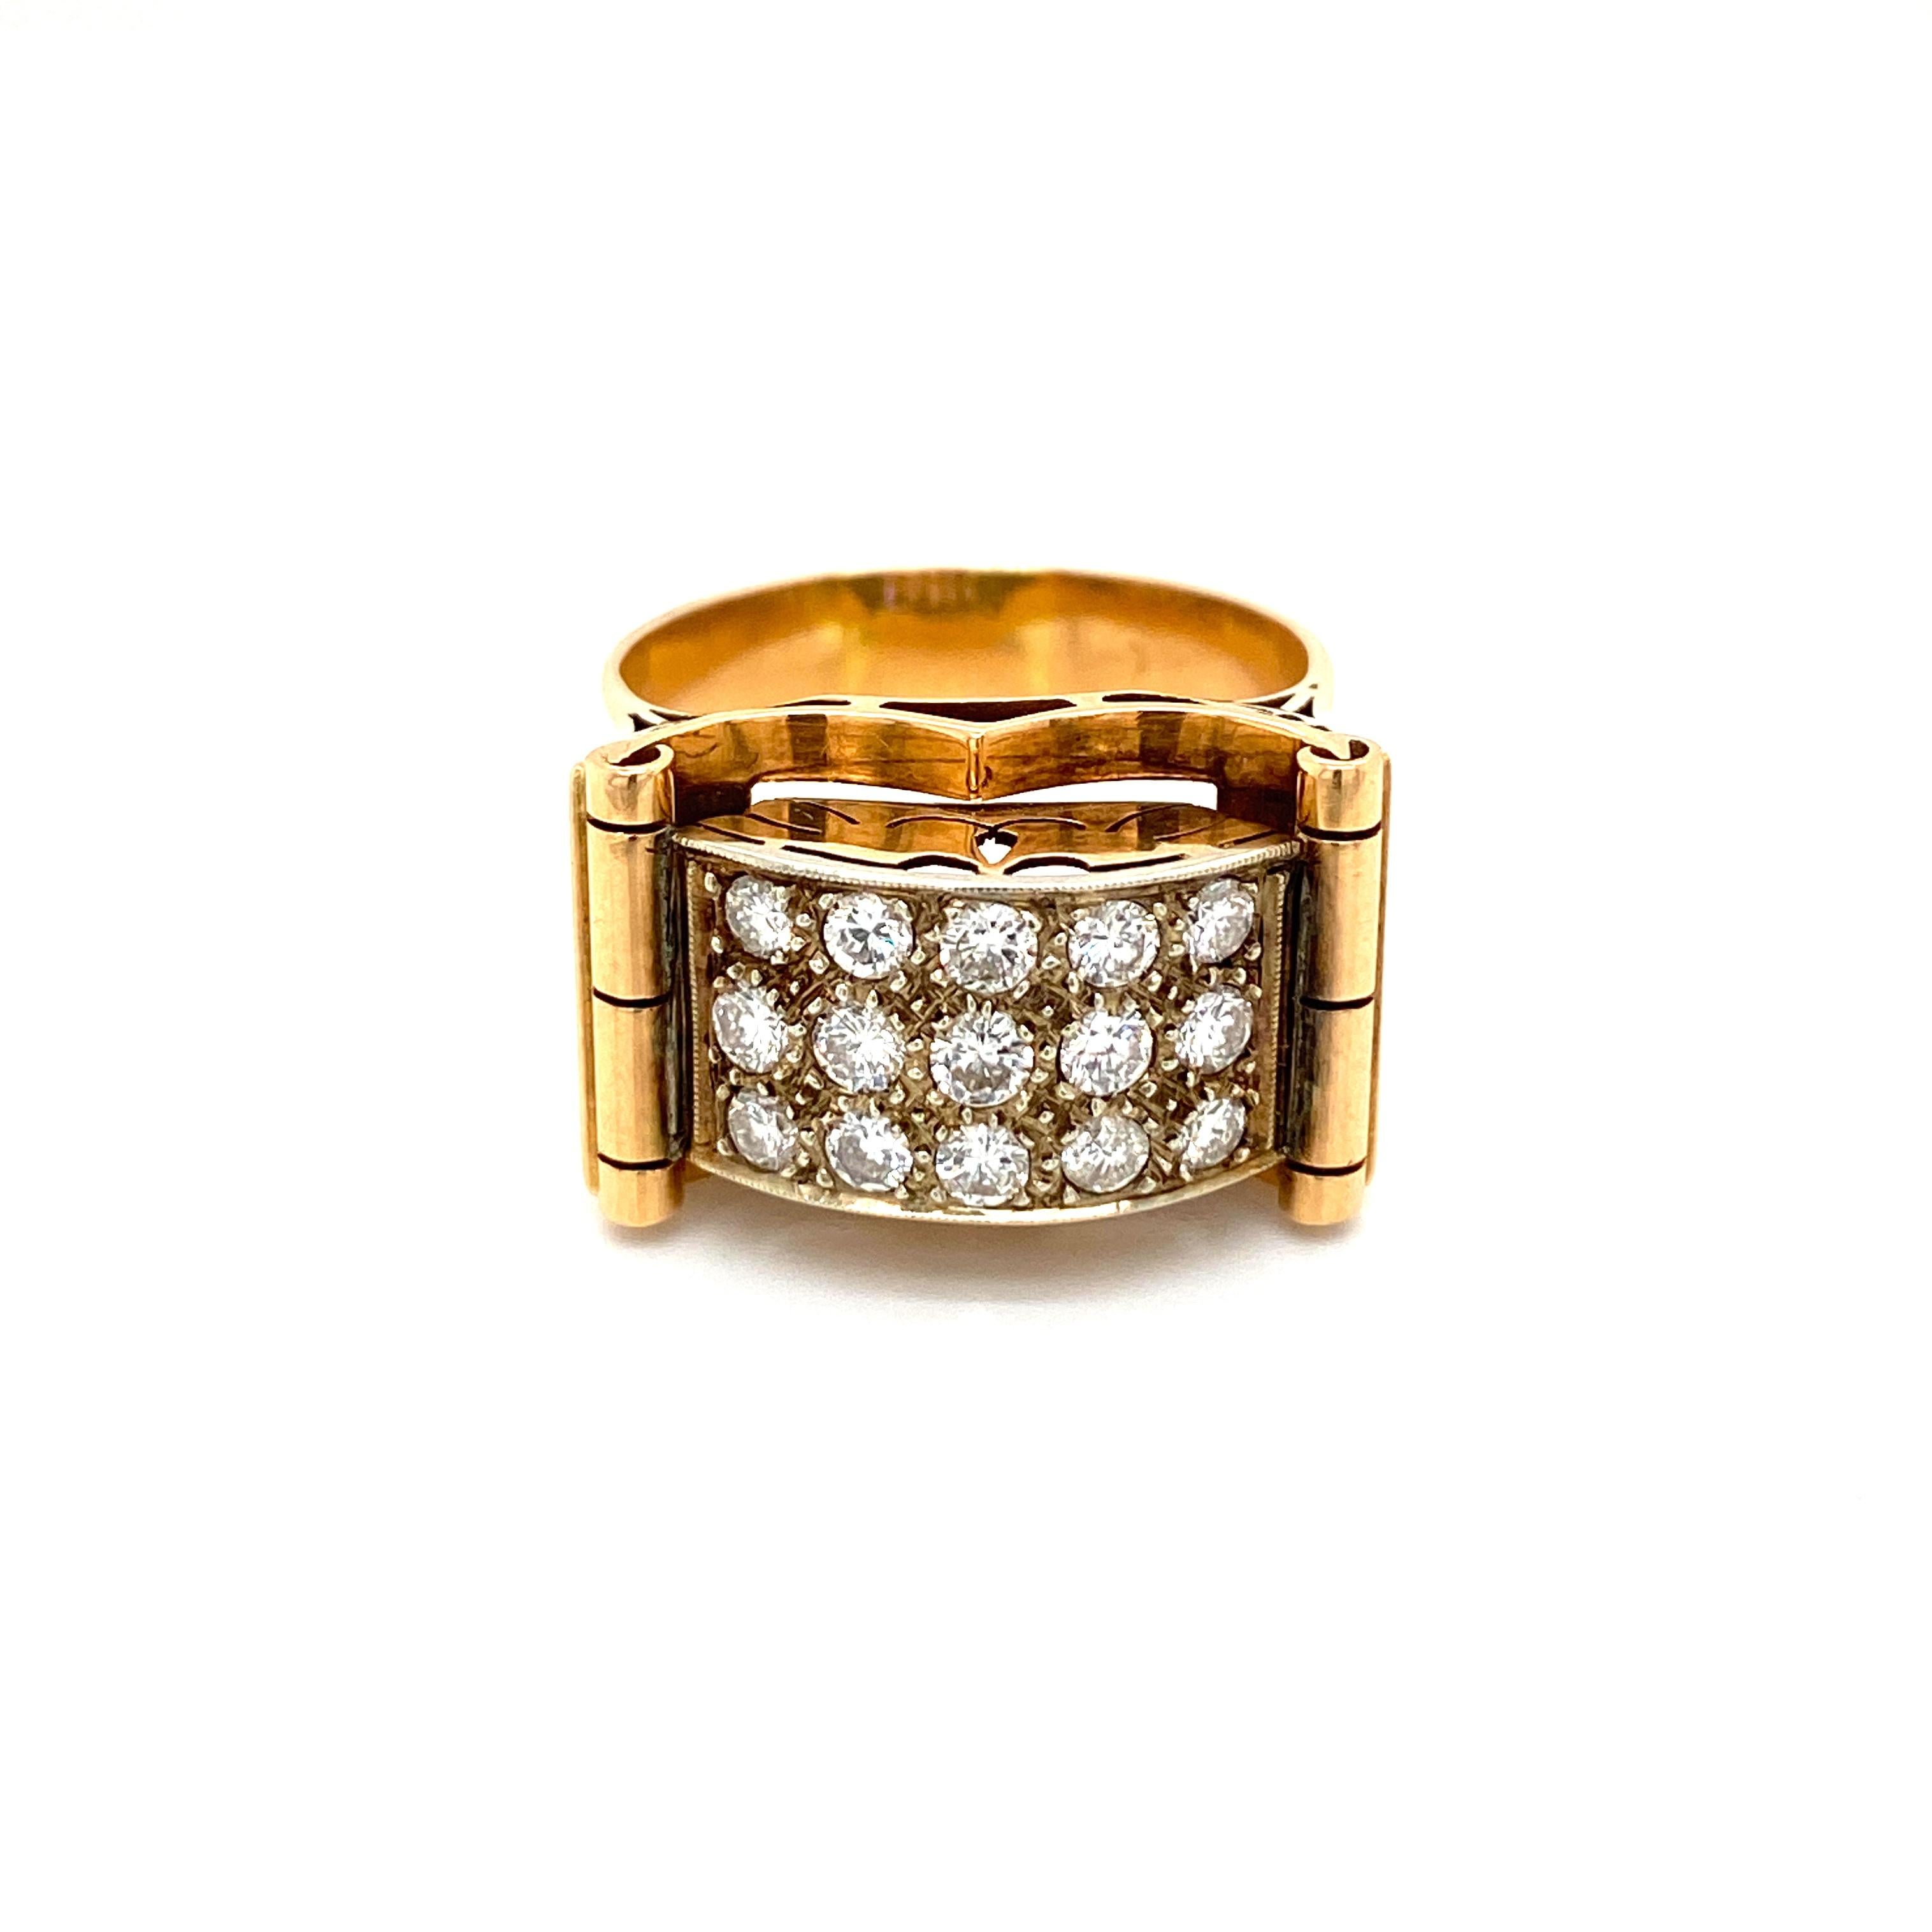 A fine antique 1.50 carat diamonds 18 karat yellow gold dress ring.
The Sparkling European cut Diamonds pave setting are graded G color Vs clarity.
Origin Italy 1930

CONDITION: Pre-owned - Excellent
METAL: 18k Gold
GEM STONE: Diamond 1.50